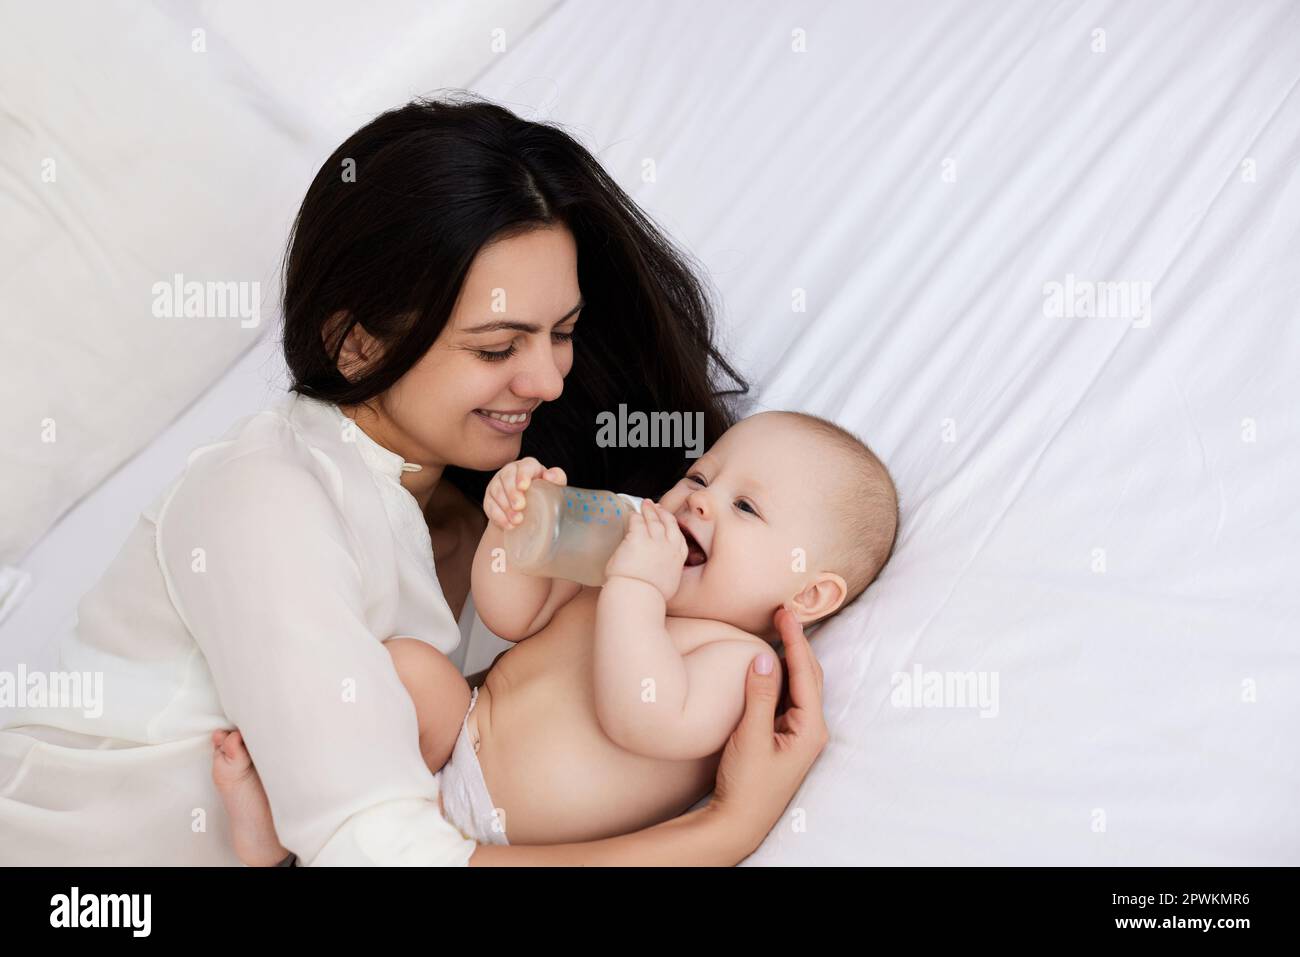 https://c8.alamy.com/comp/2PWKMR6/happy-mother-feeding-her-newborn-baby-in-a-white-bedroom-mom-holding-a-bottle-of-formula-milk-2PWKMR6.jpg